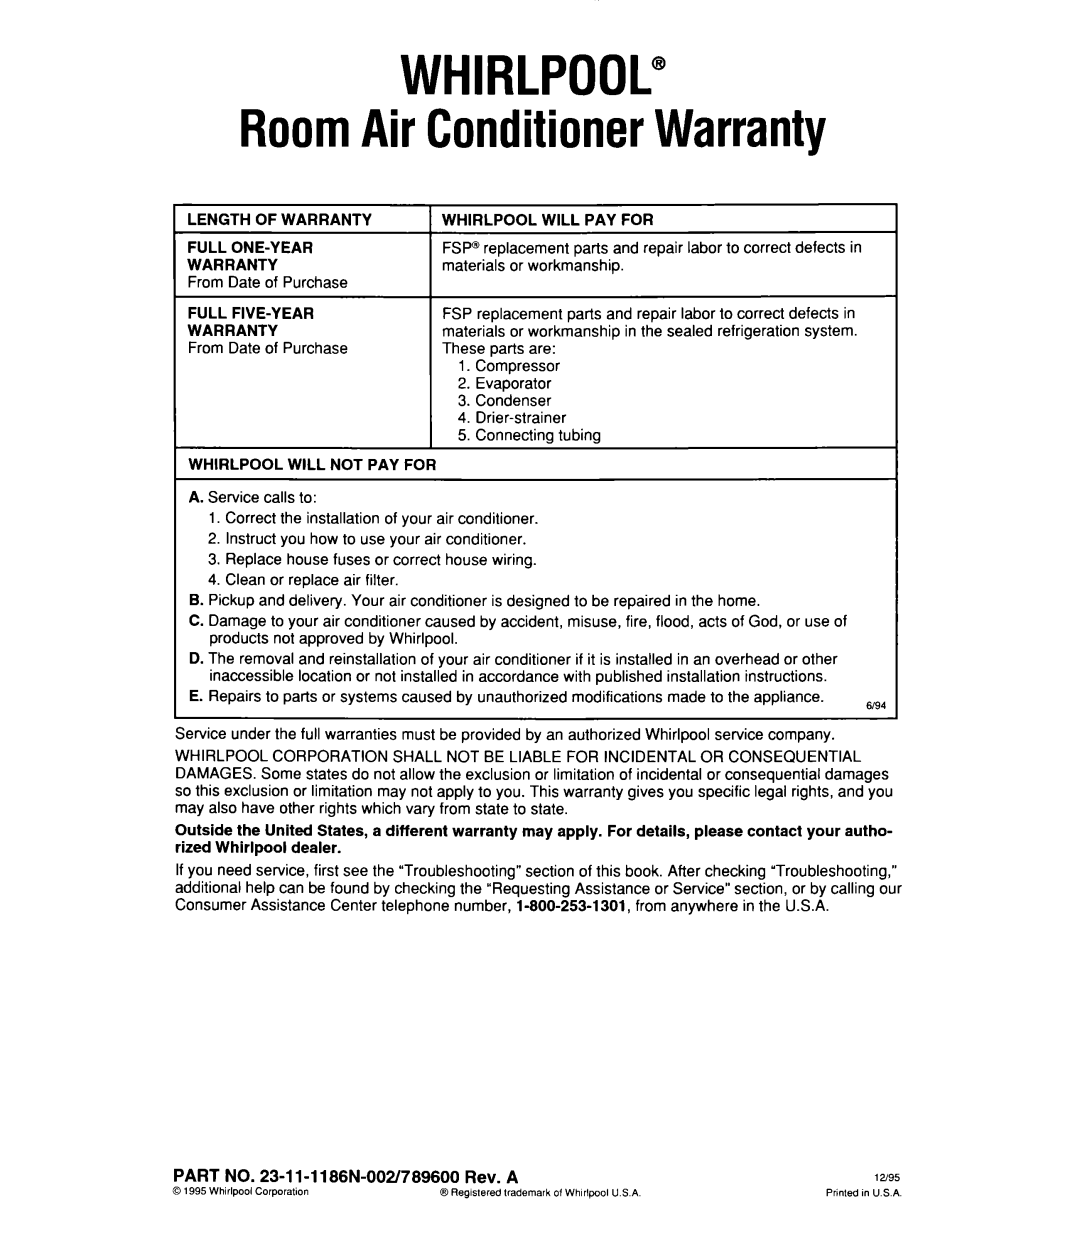 Whirlpool ACU072XE Whirlpool, PART NO. 23-1 l-l 186N-002/789600Rev. A, RoomAir ConditionerWarranty 